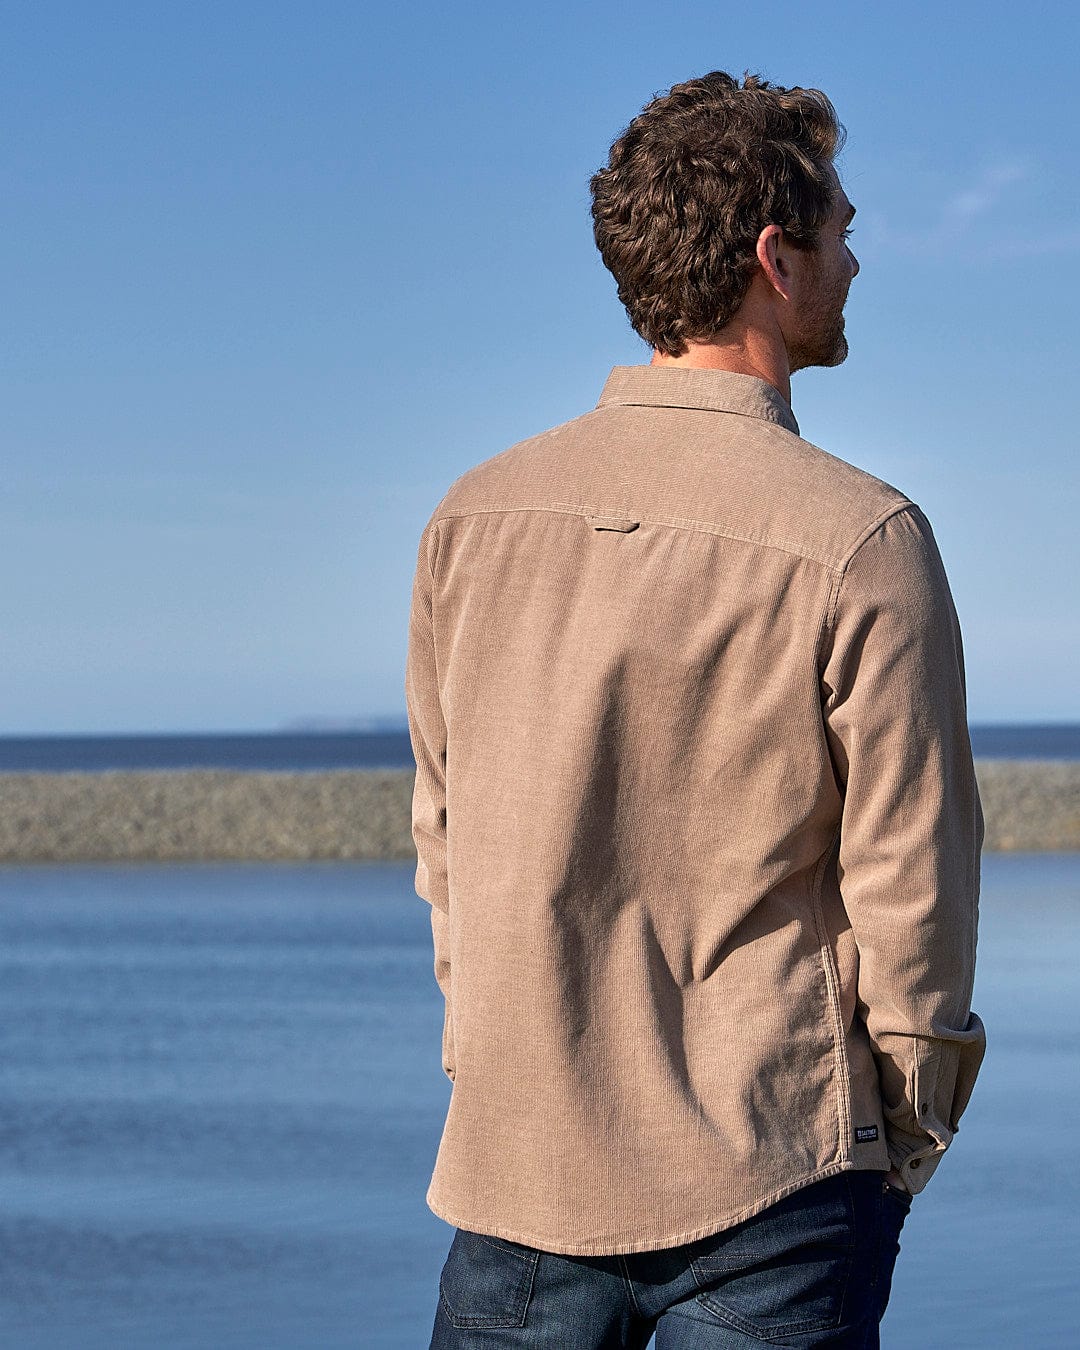 A man wearing a Saltrock - Ace Men Corduroy Shirt - Light Brown is standing by the water.